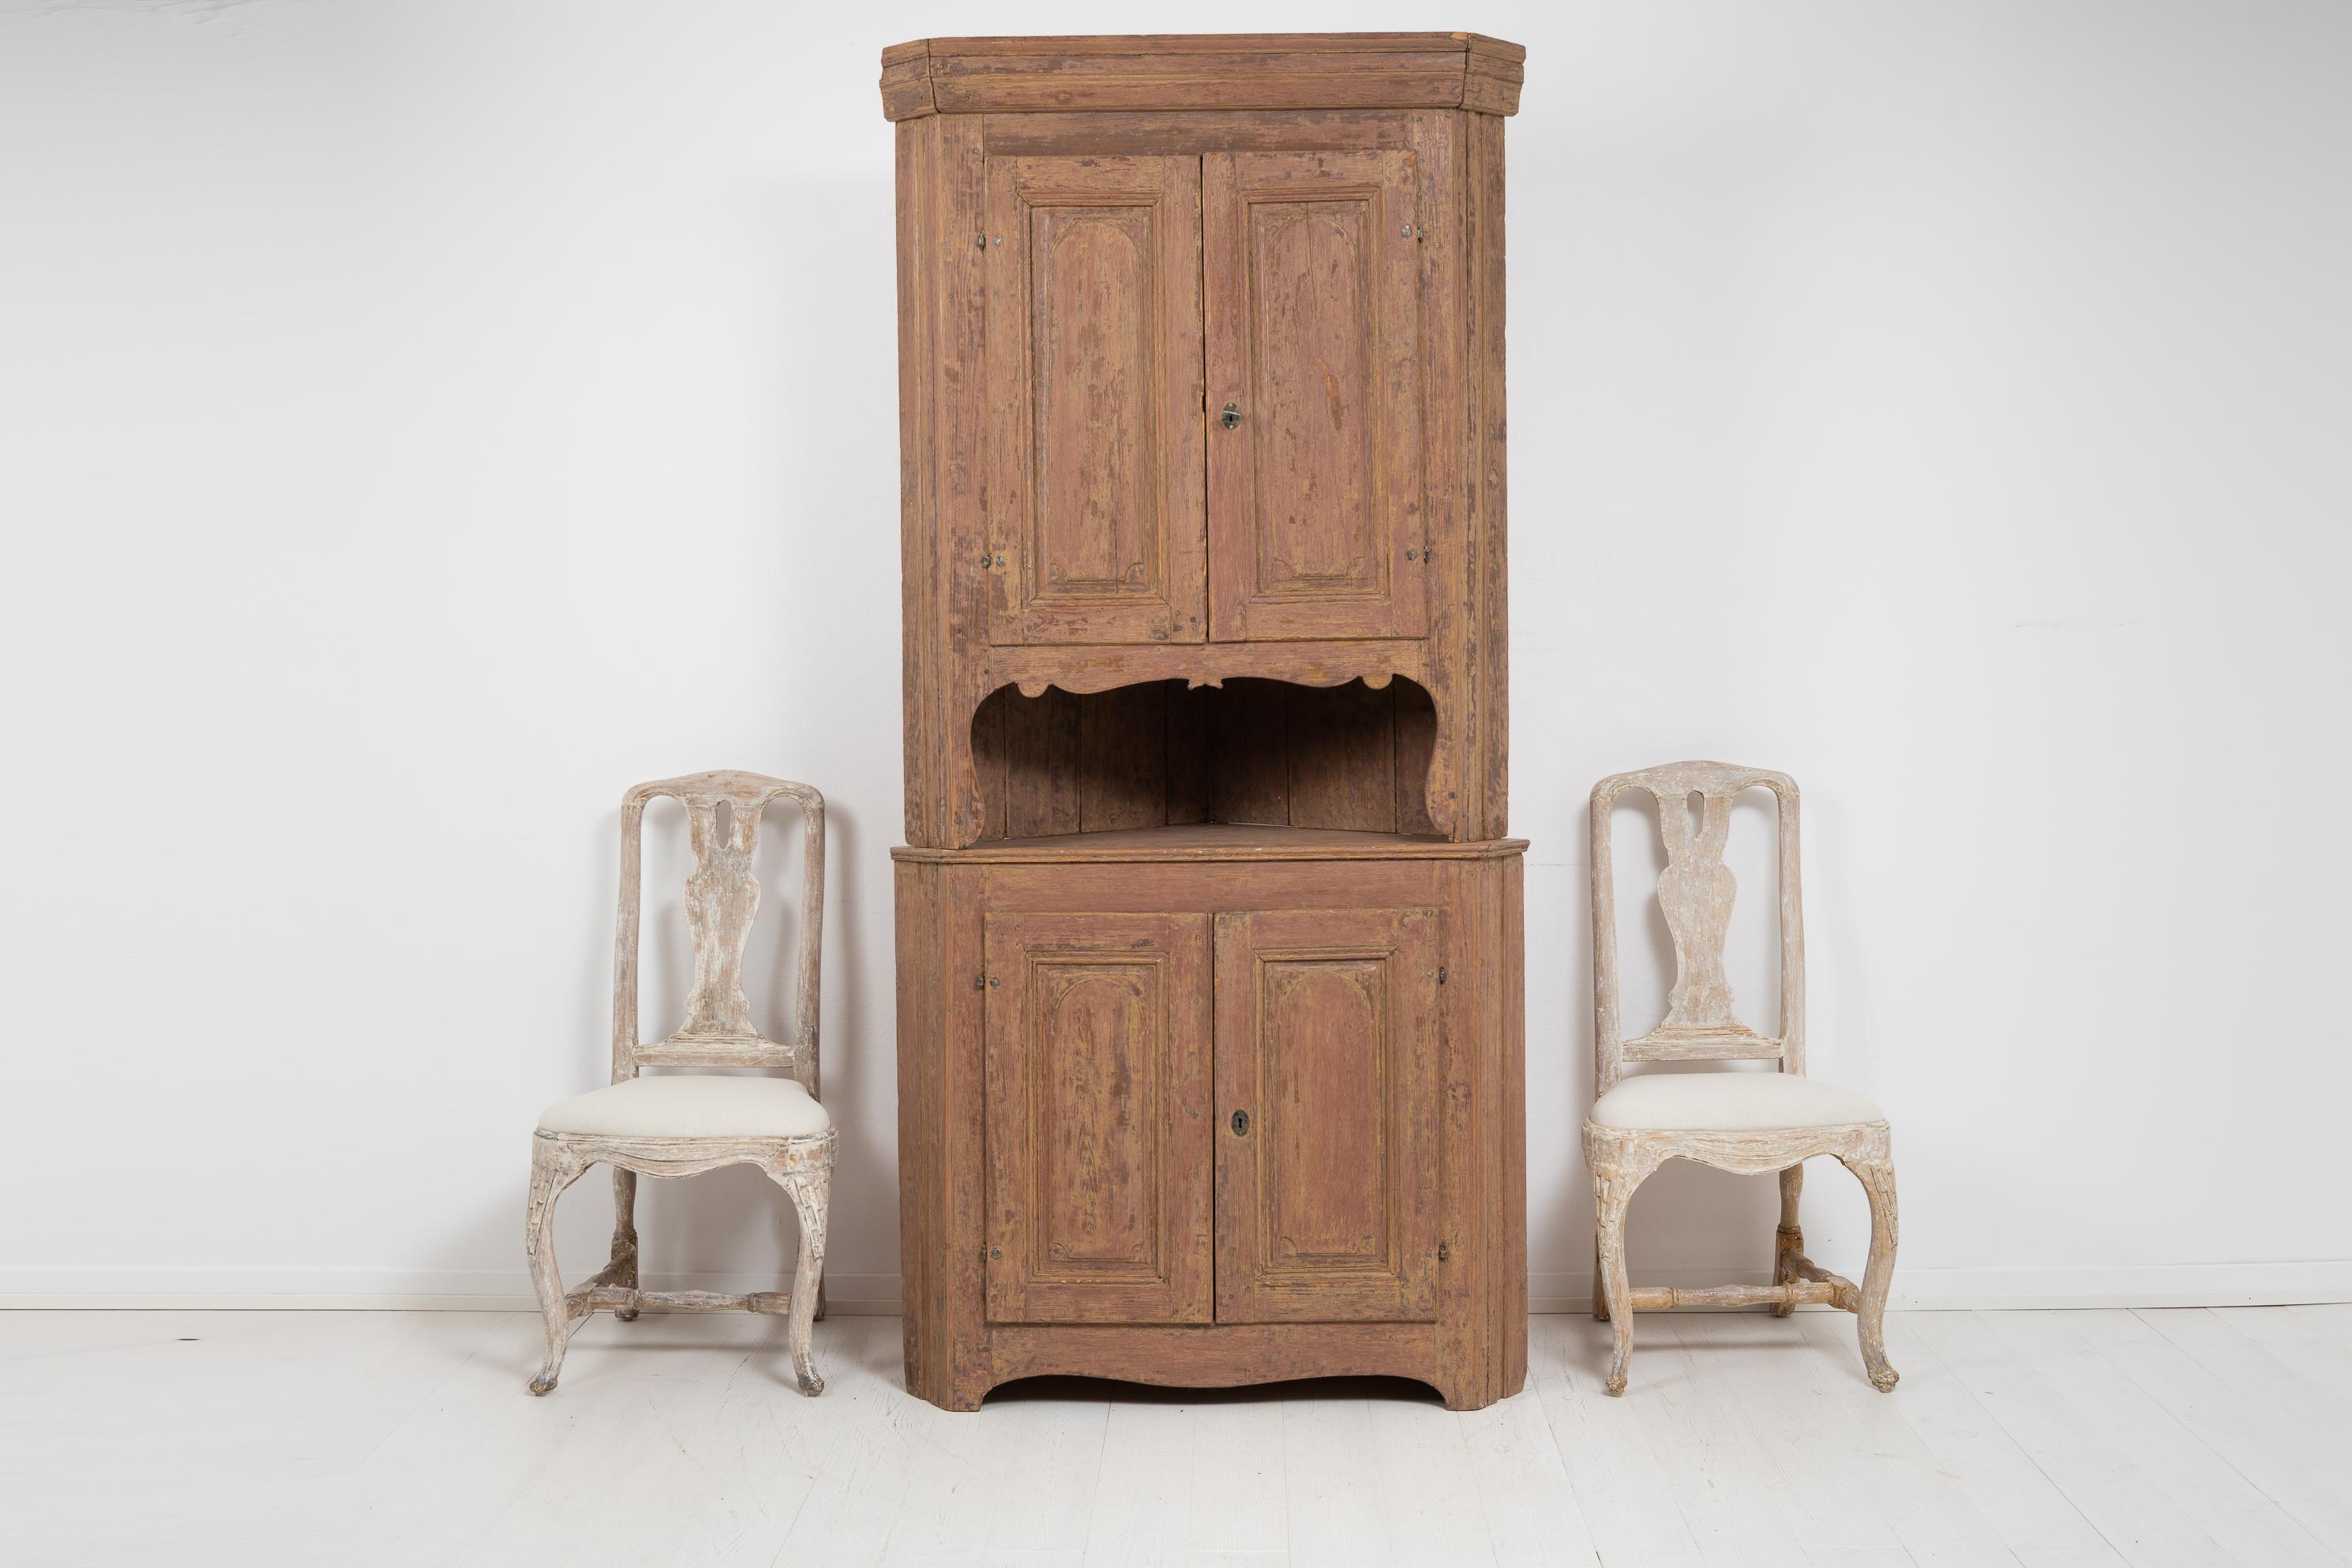 Northern Swedish country neoclassic corner cabinet with the characteristic neoclassical shape. Made in pine around 1800 to 1820, the Swedish neoclassical period is also known as the gustavian period. The cabinet is in 2 parts with old historic paint